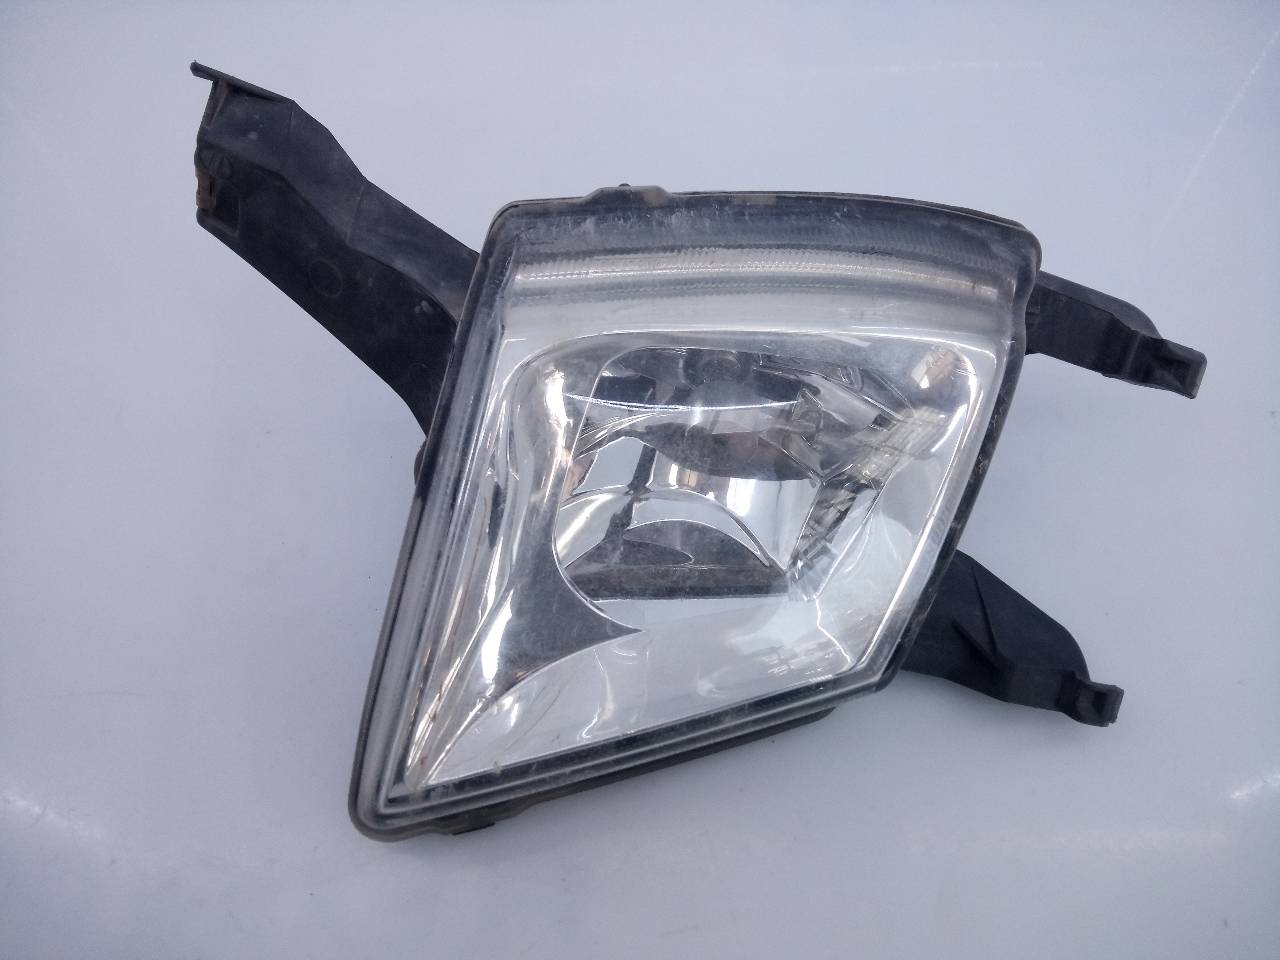 VAUXHALL 407 1 generation (2004-2010) Front Right Fog Light 9641945480, E1-A4-6-1 18774201